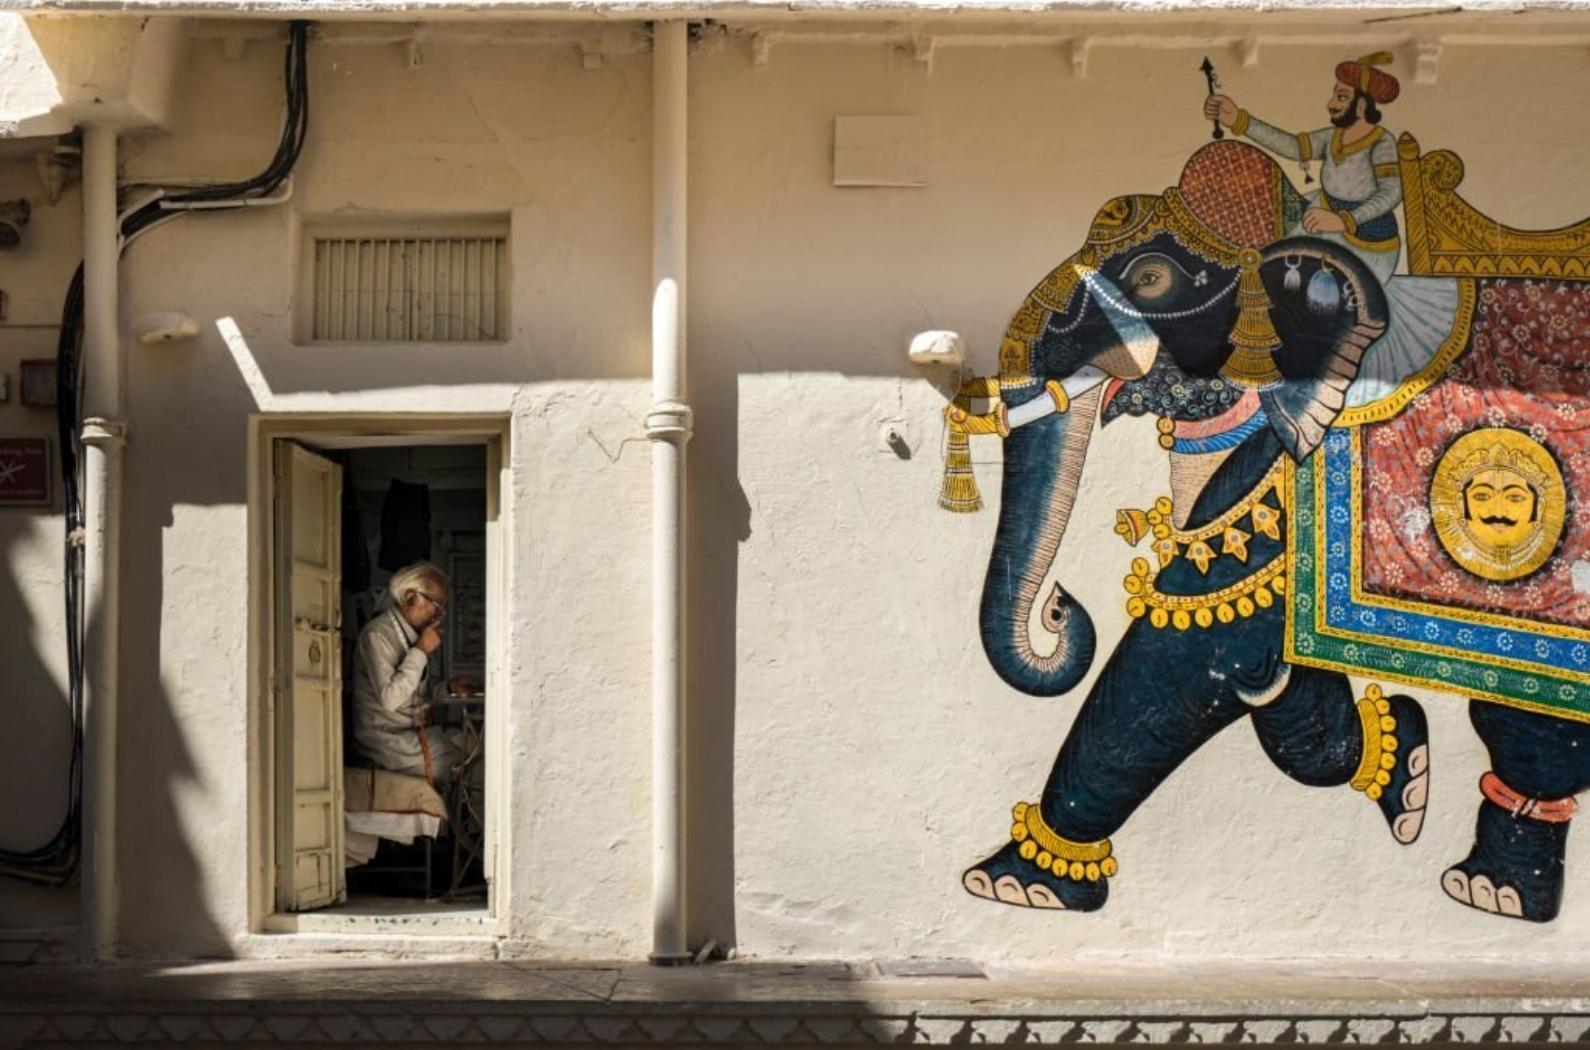 Mural painting of the Maharaja and his royal elephant at inner court of Udaipur's city palace.